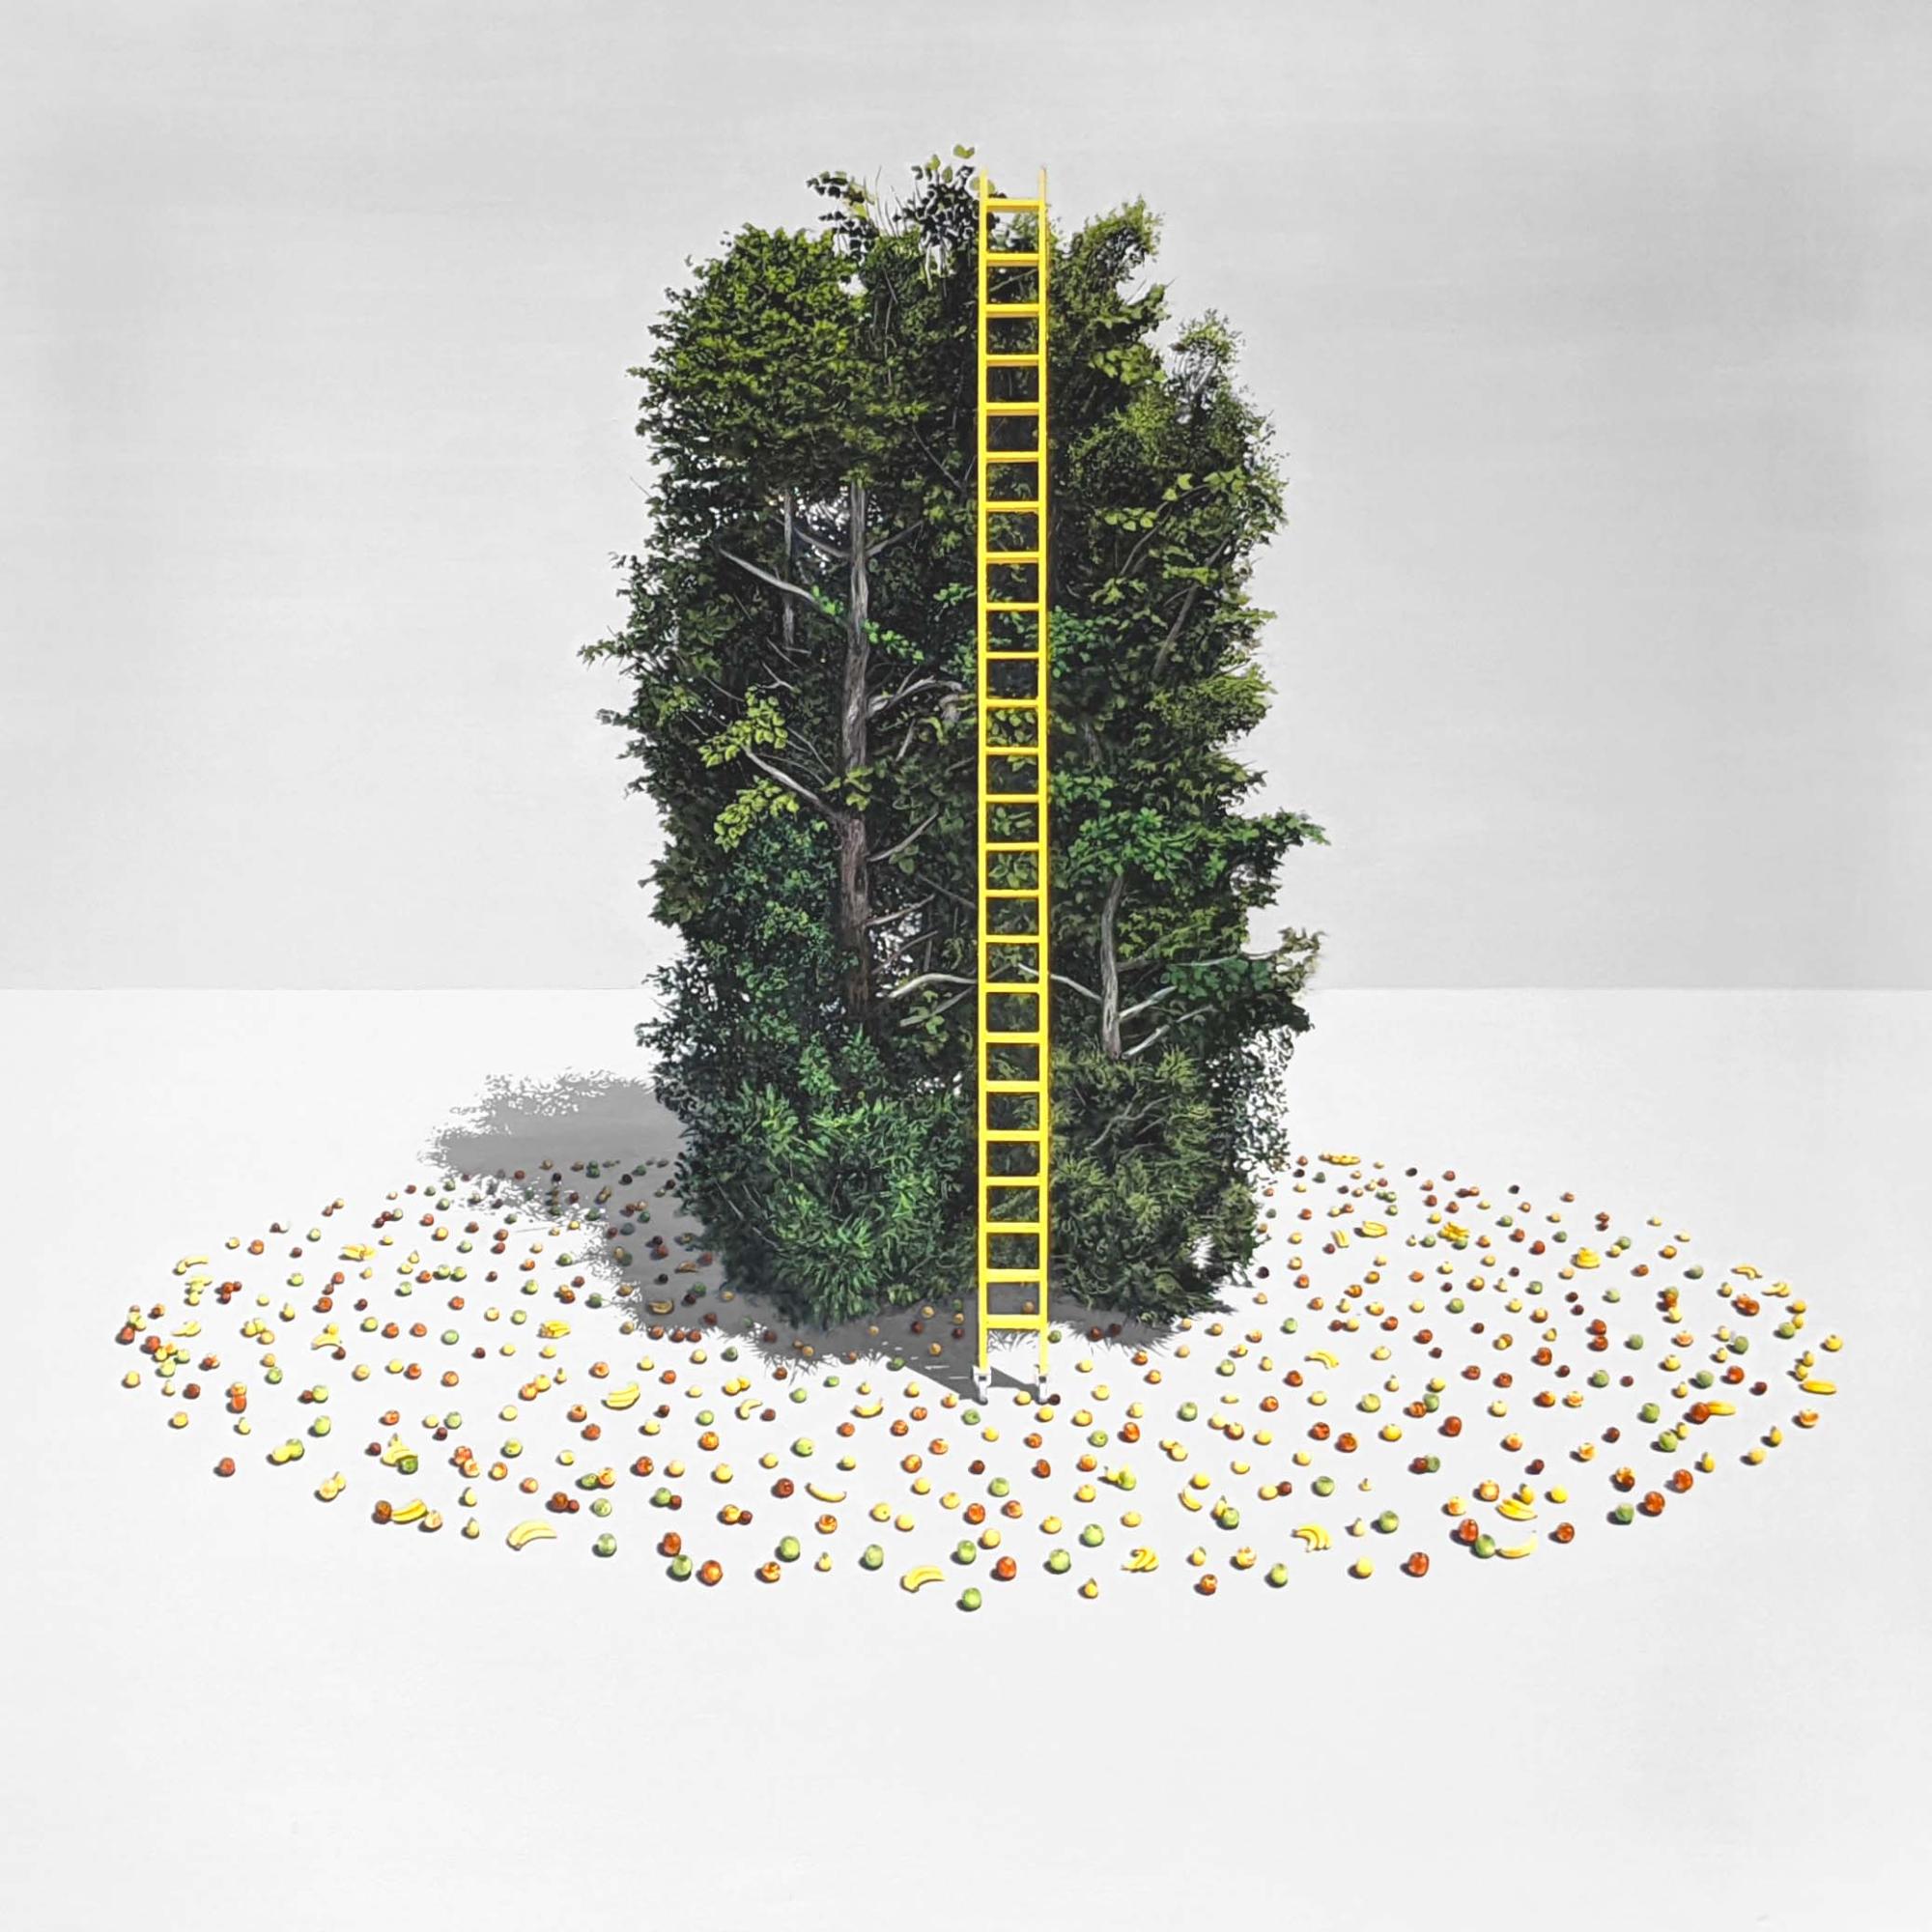 A bright yellow ladder stands in front of a cluster of green foliage, with a pile of fruit on the ground around it. 